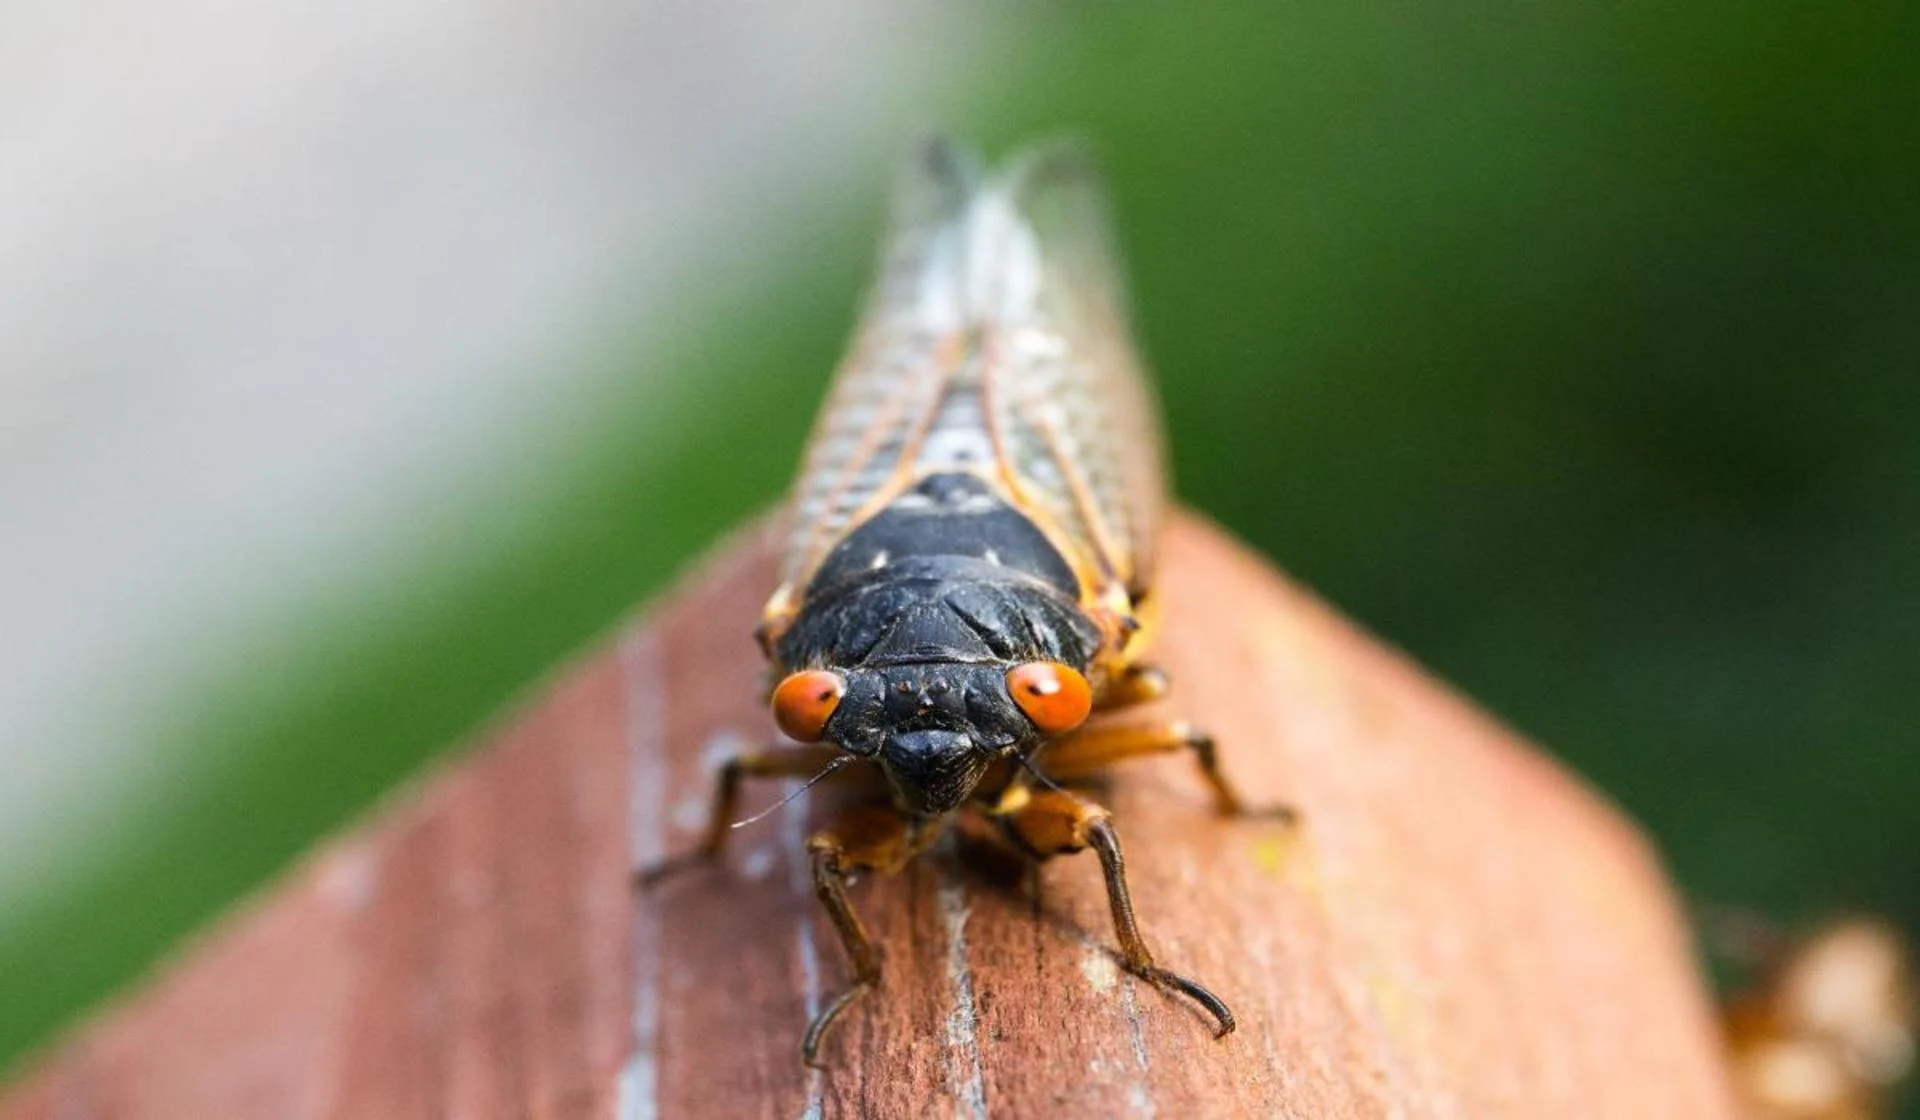 From car accidents to airplane delays, four strange cicada headlines